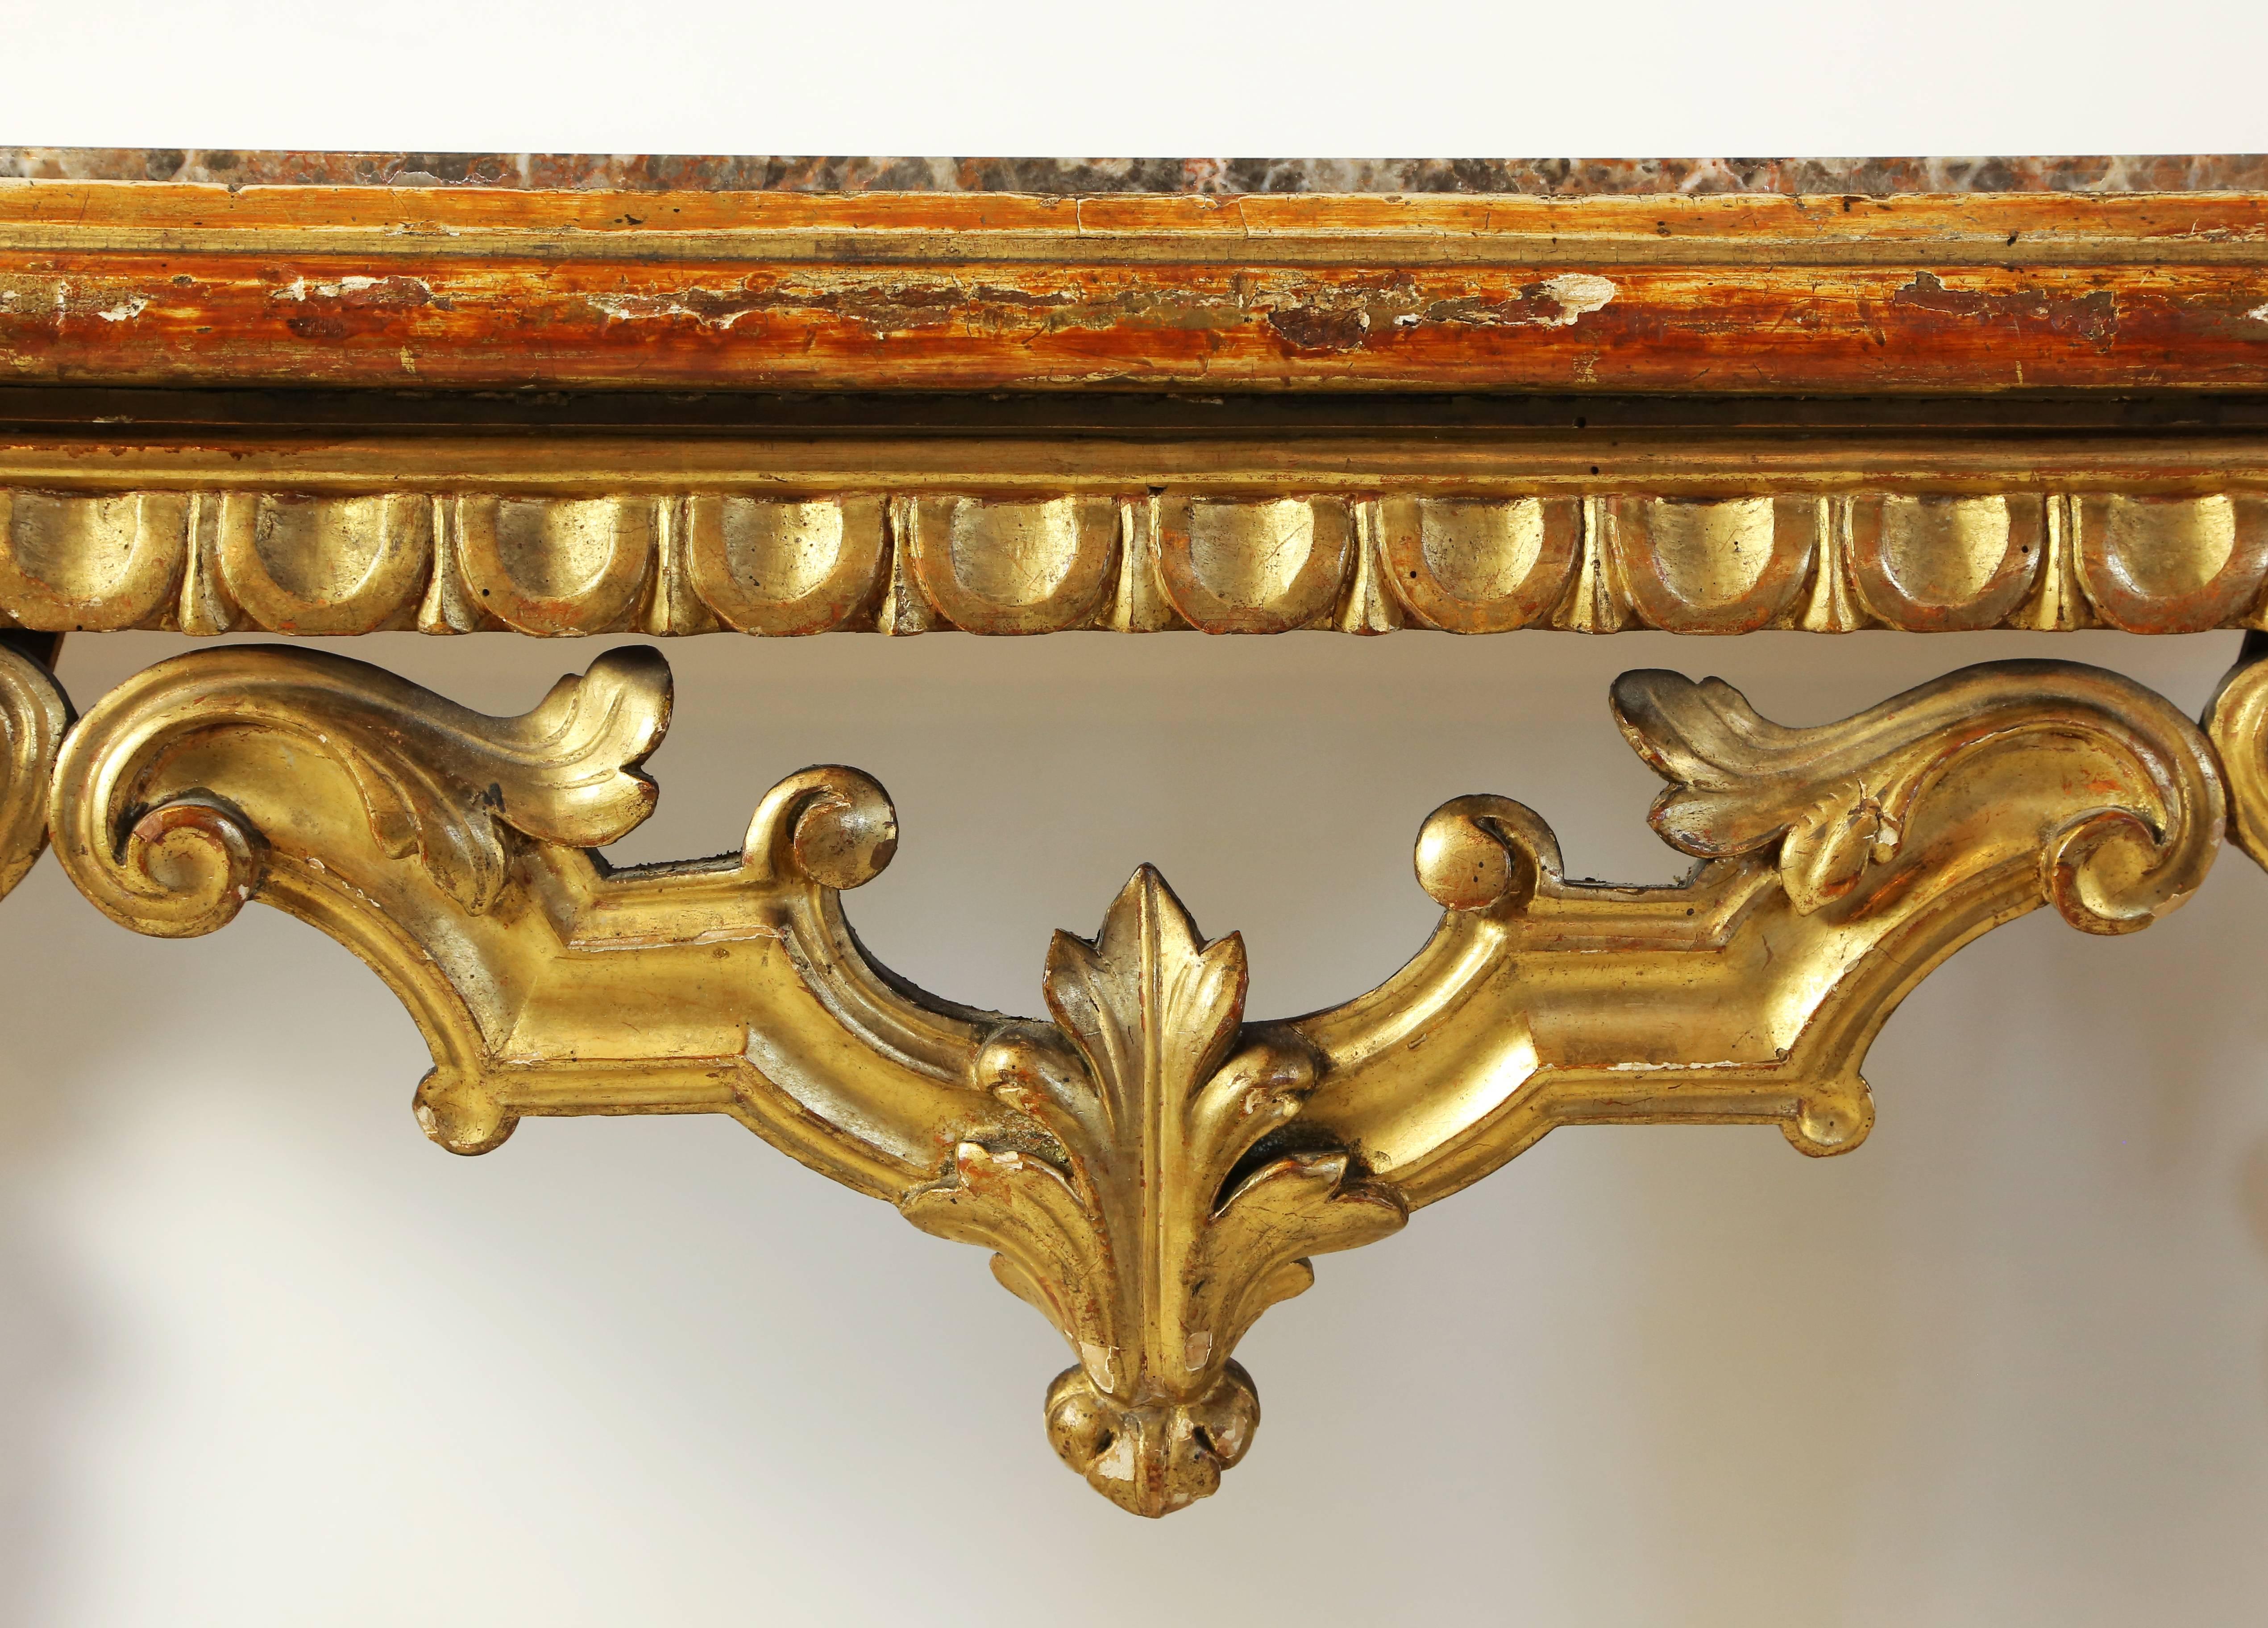 Carved Antique Italian Giltwood and Marble-Topped Console